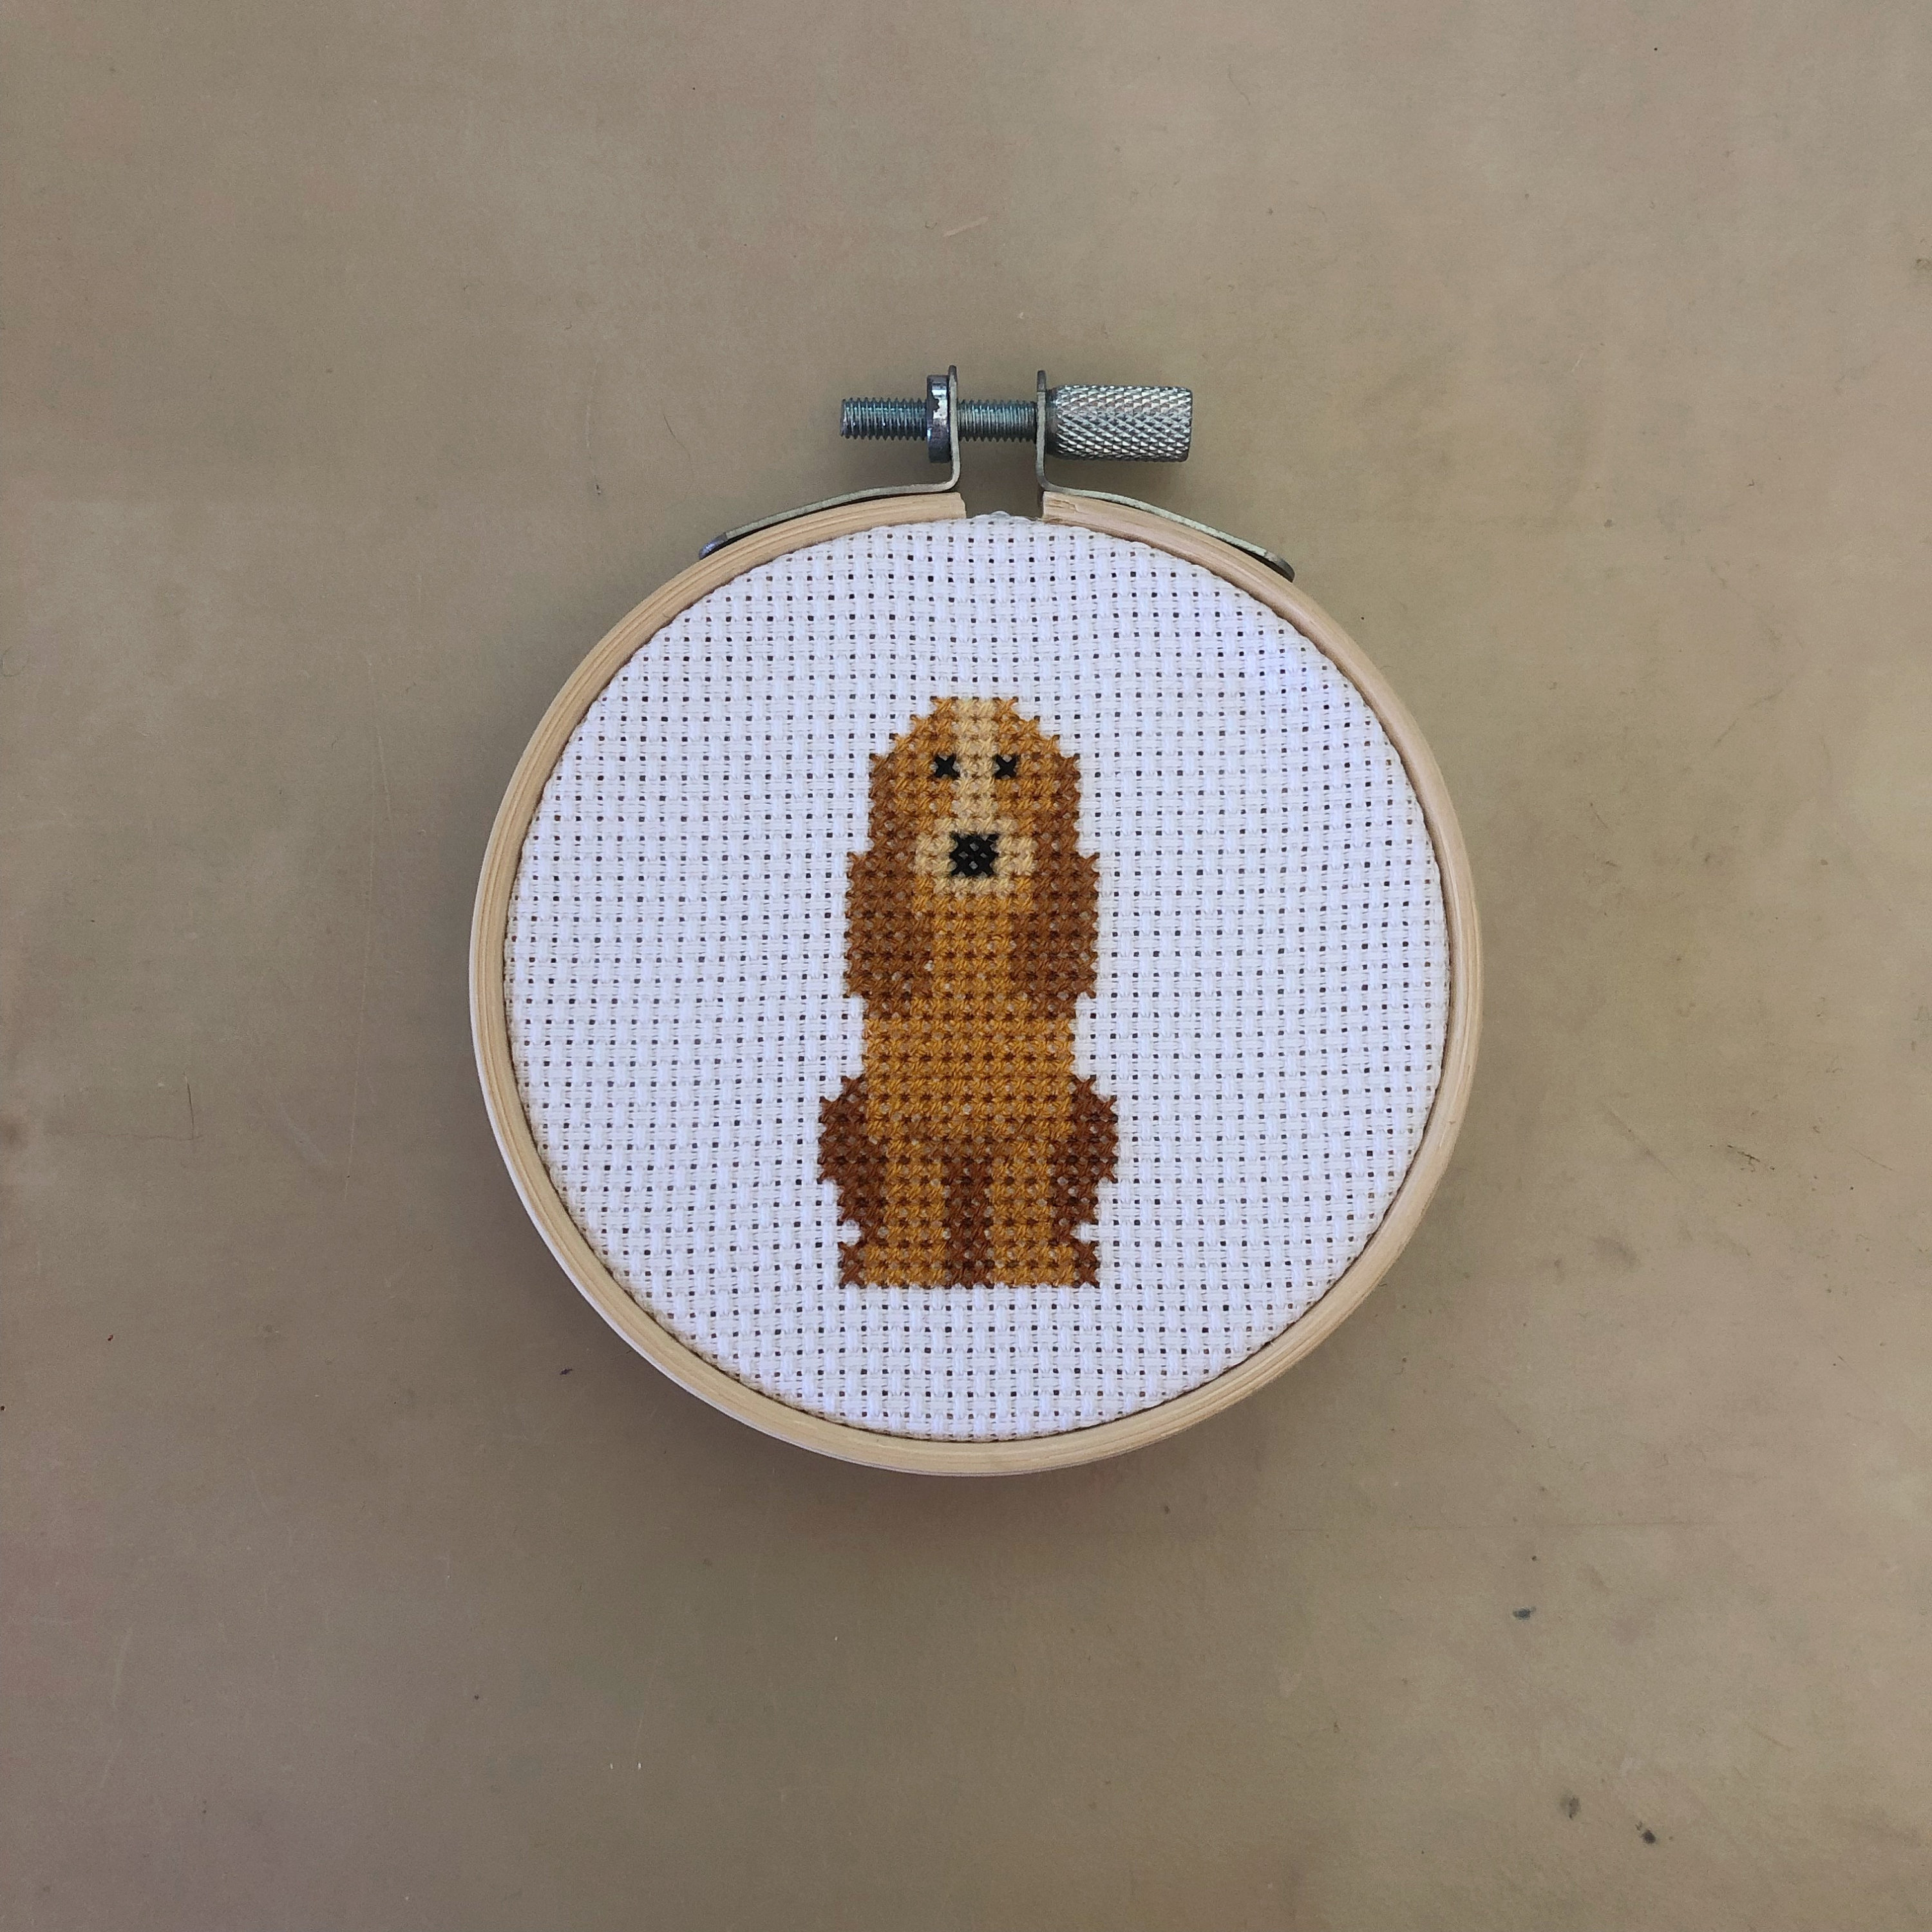 Completed Cocker Spaniel Cross Stitch